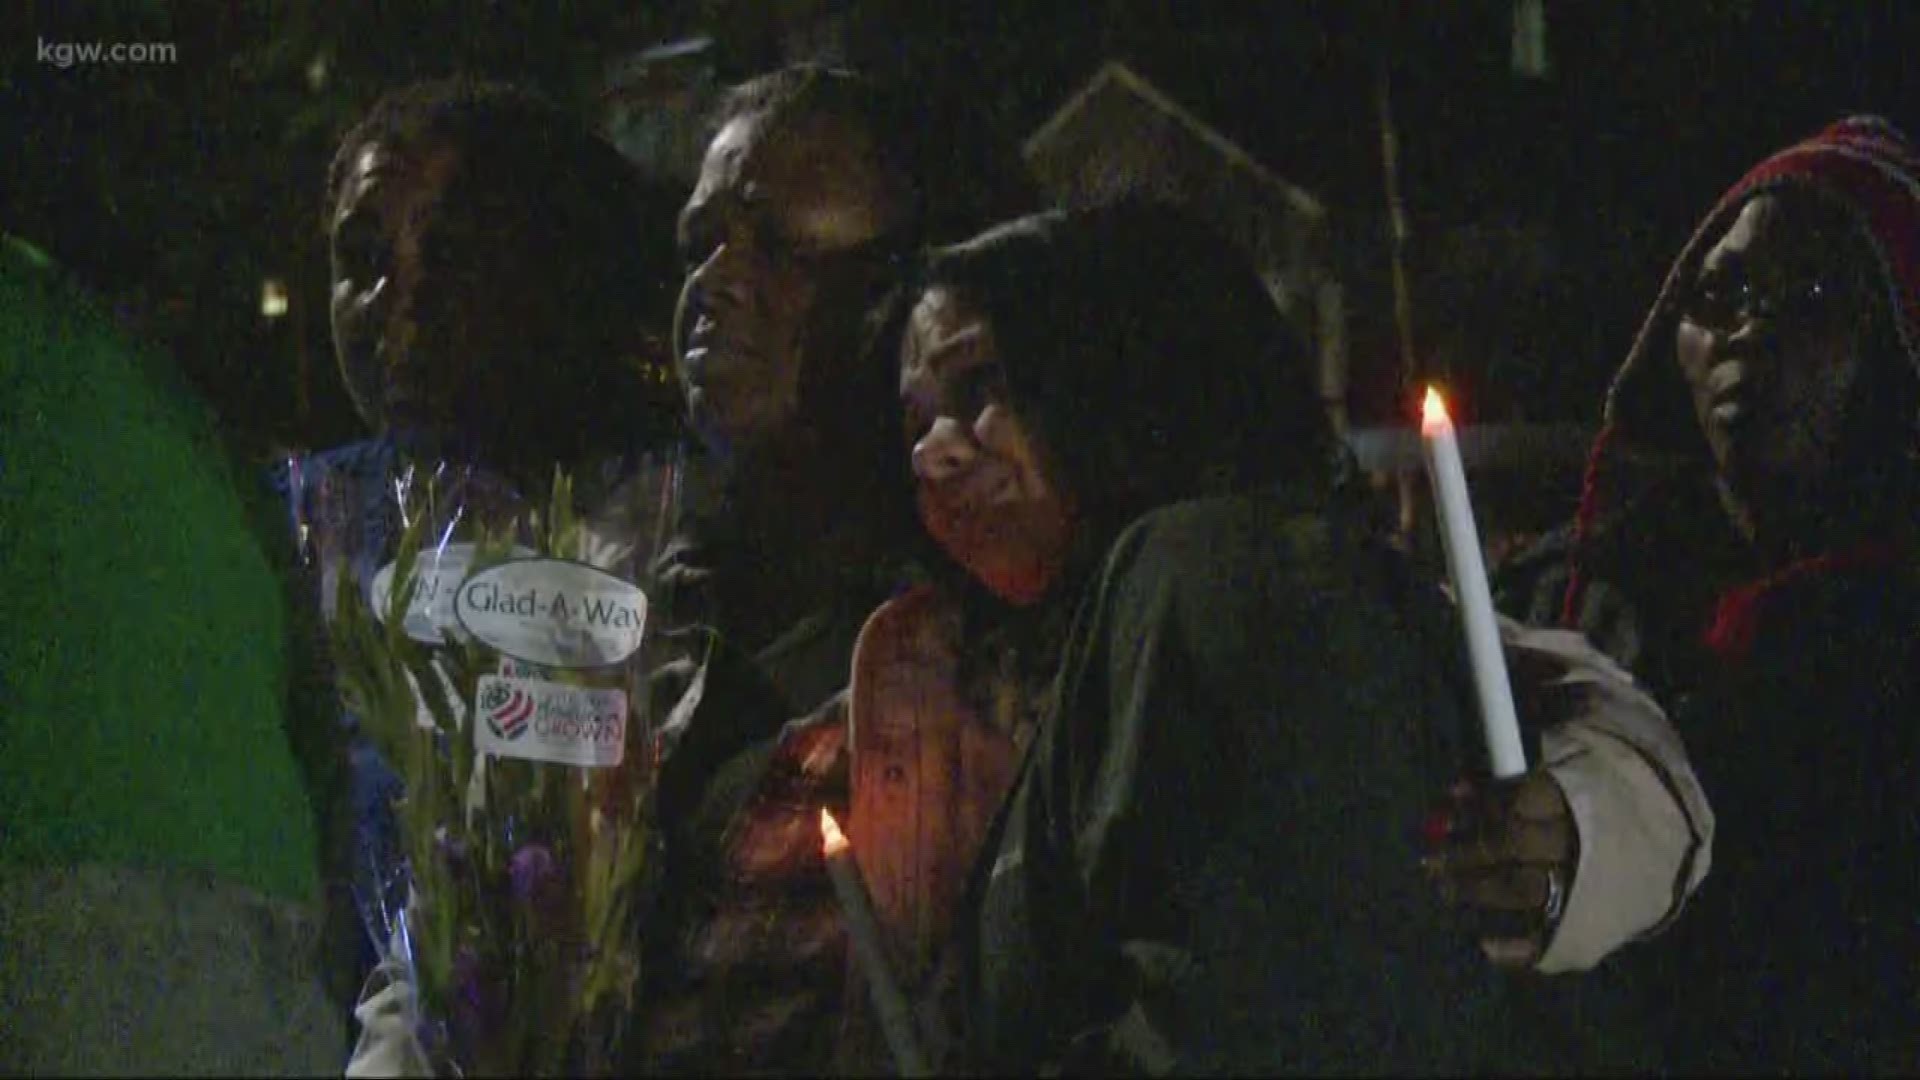 A vigil was held on Thursday for the 39-year-old man who was shot and killed in Northeast Portland earlier in the week.